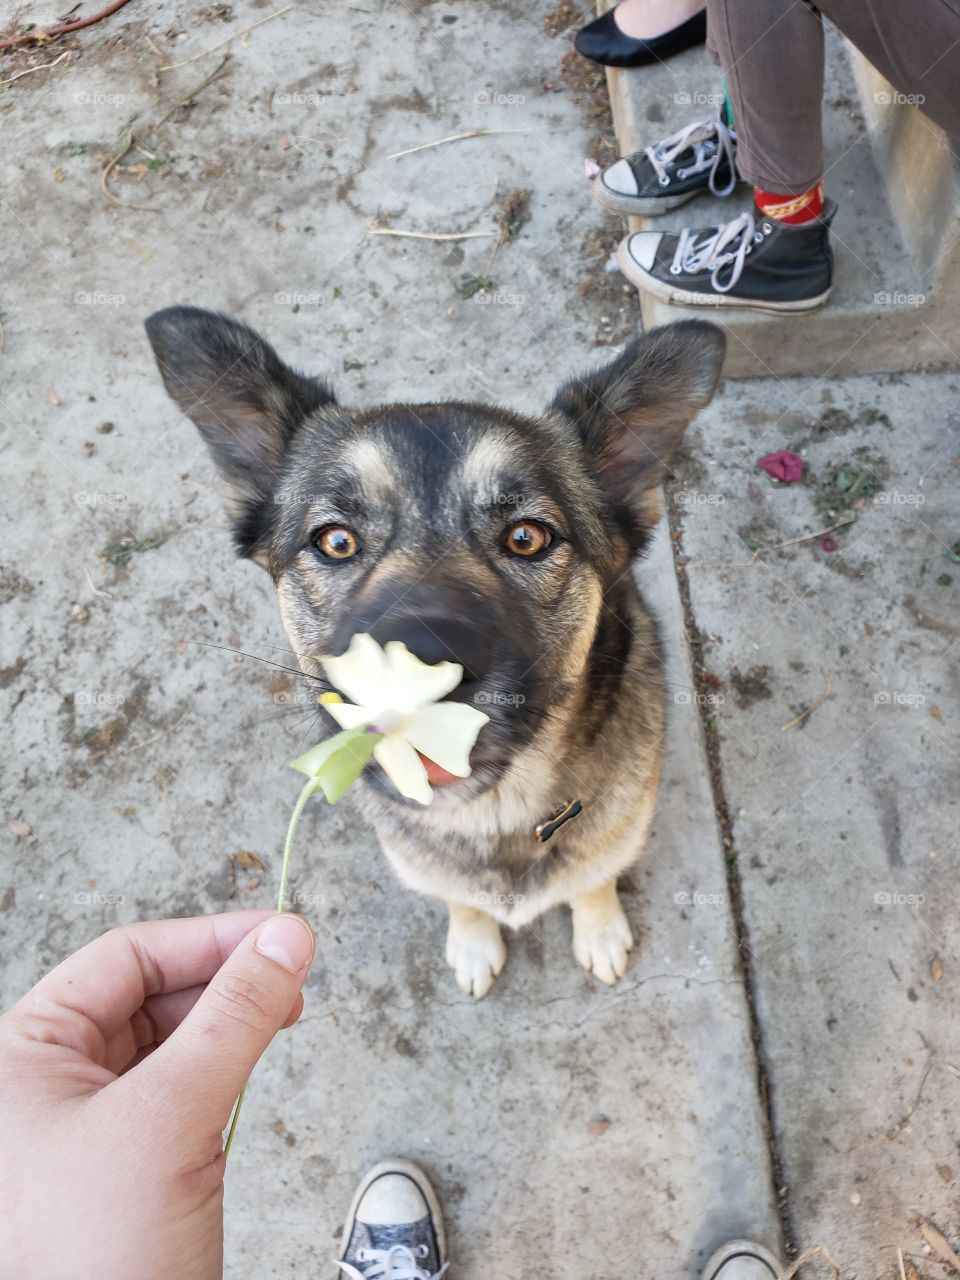 Chelsea the german shephard stopping to smell the flowers.